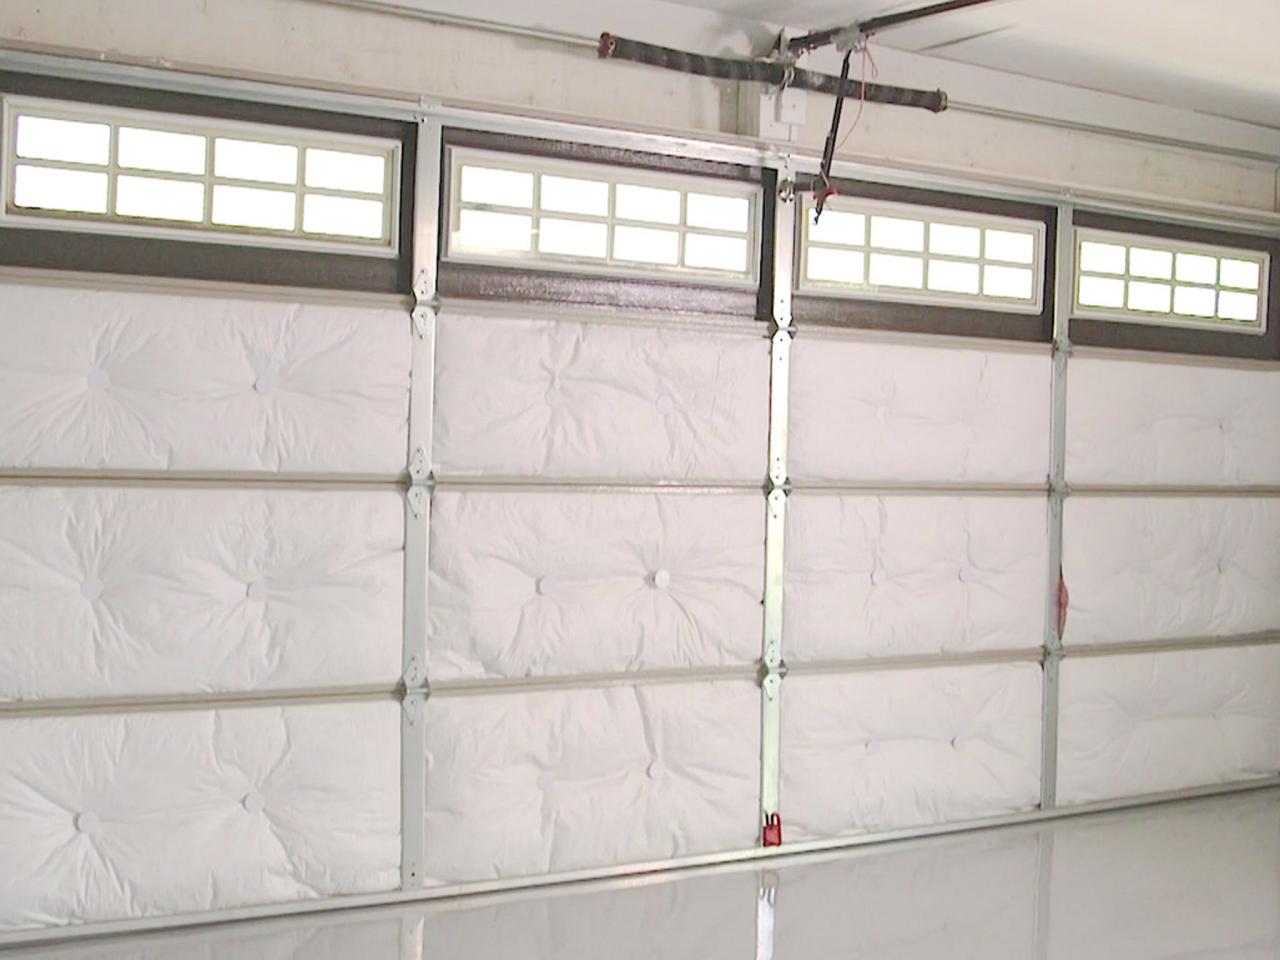 How can I improve the garage door's insulation without replacing it? 2